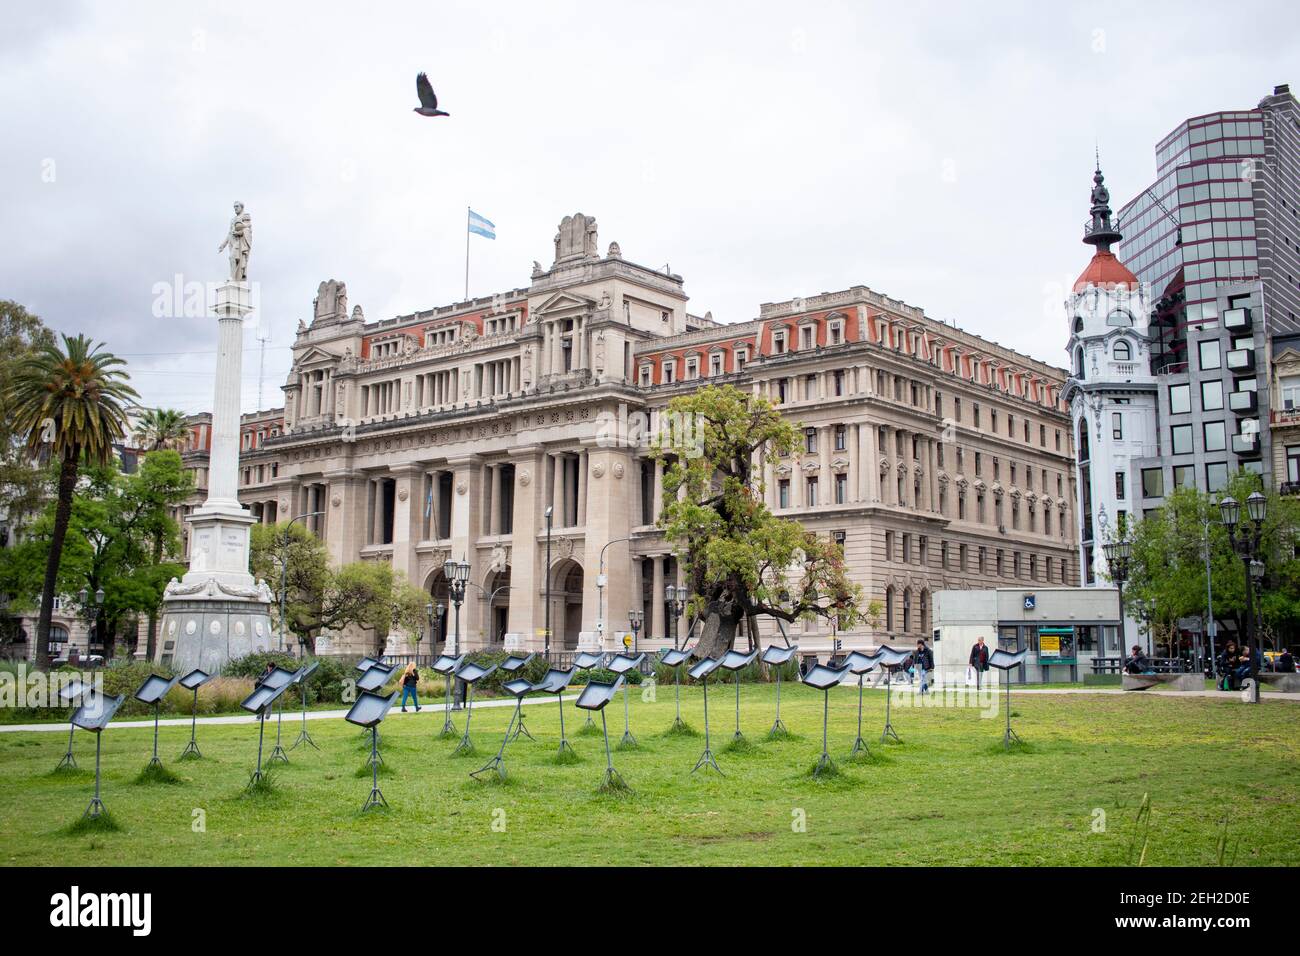 BUENOS AIRES - 15TH OCT 2019: View of the Supreme Court of Justice of the Nation, in the city of Buenos Aires in Argentina Stock Photo